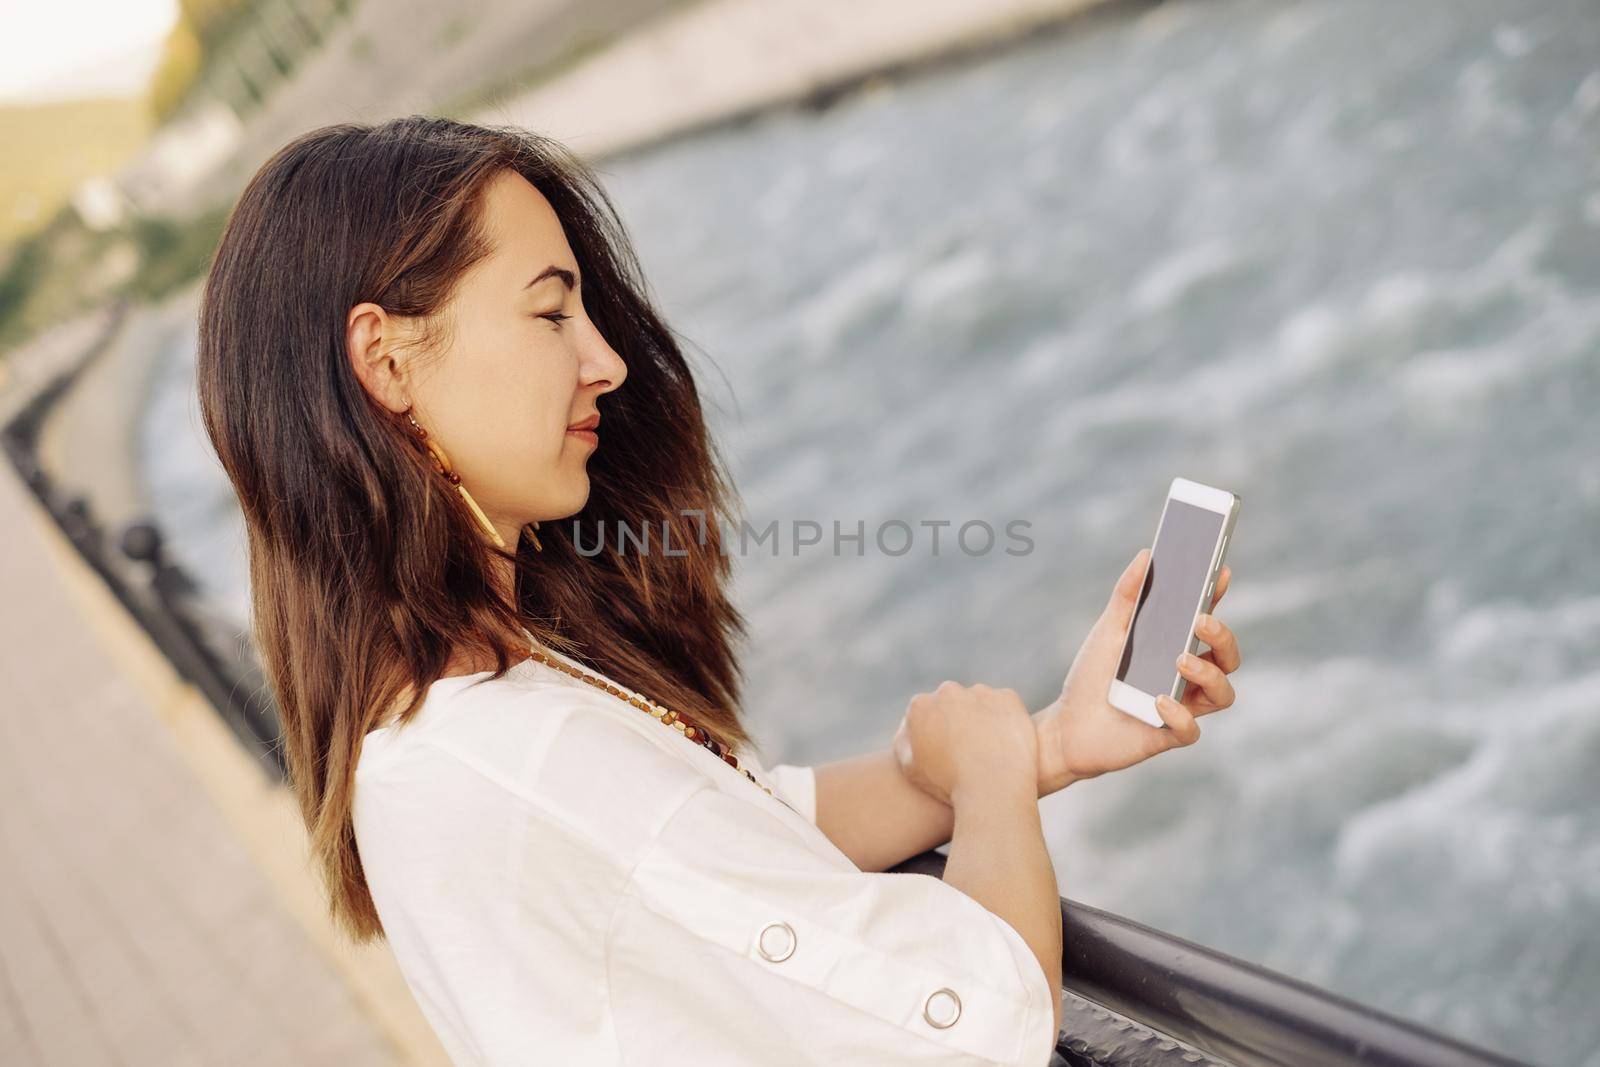 Smiling young woman using mobile phone while standing on embankment of river in summer outdoor.